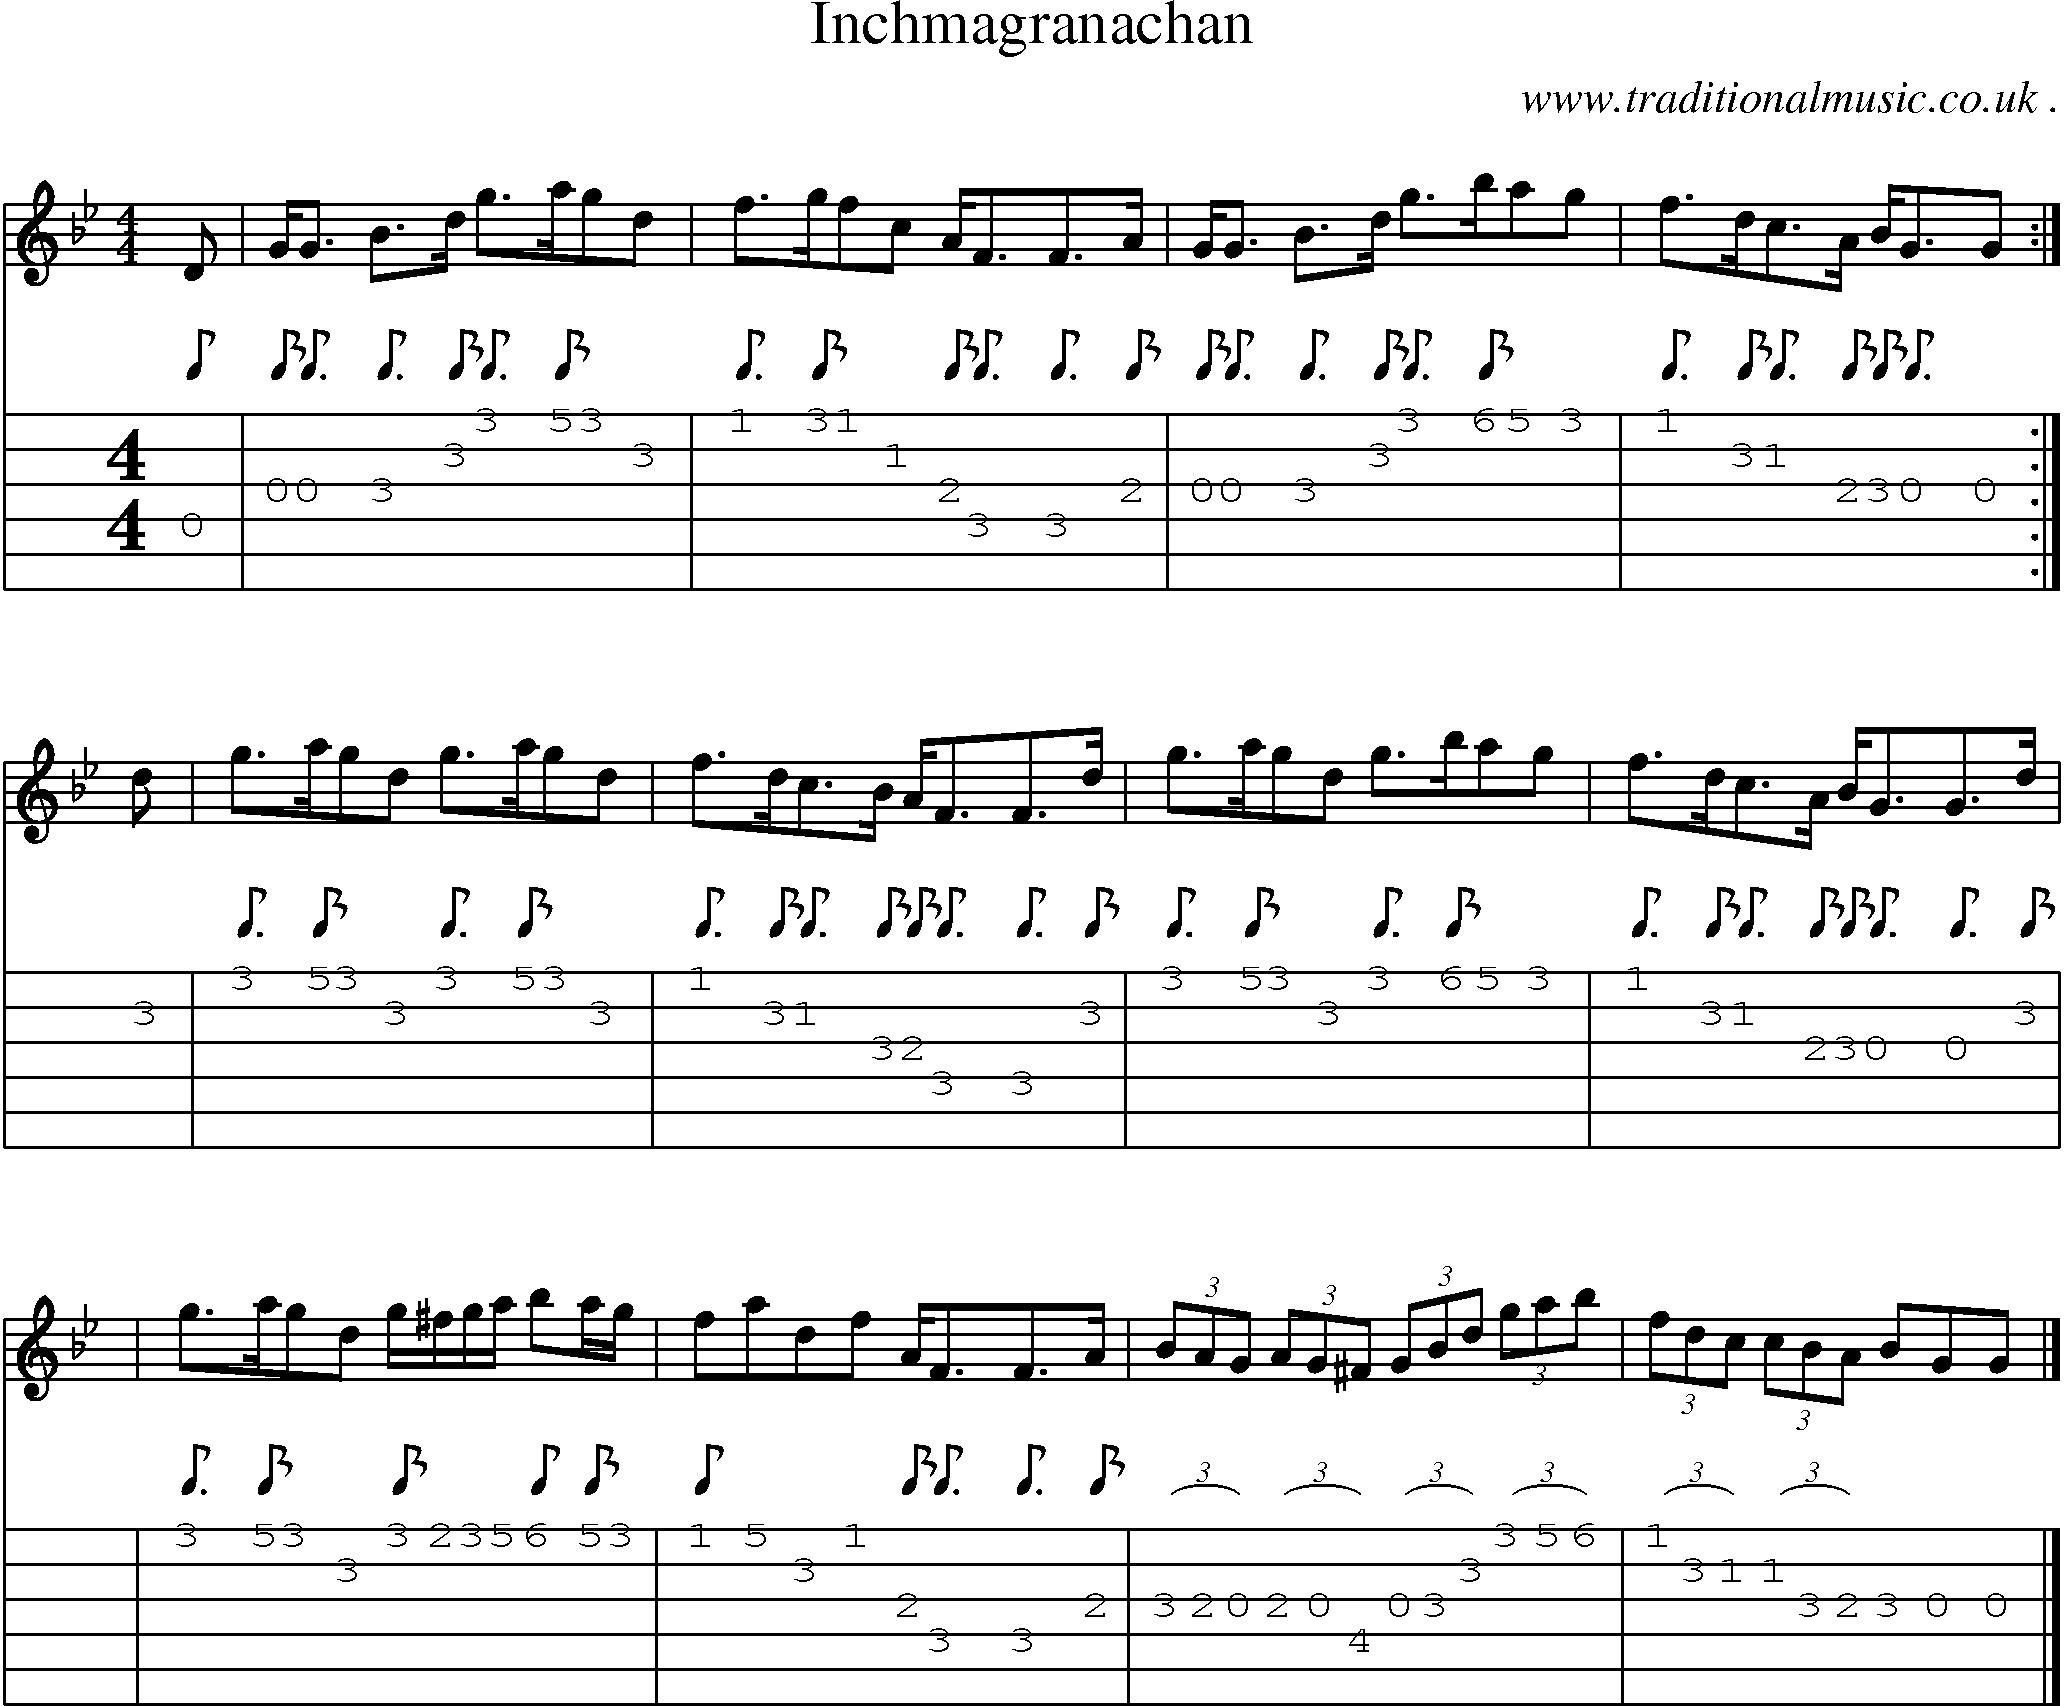 Sheet-music  score, Chords and Guitar Tabs for Inchmagranachan